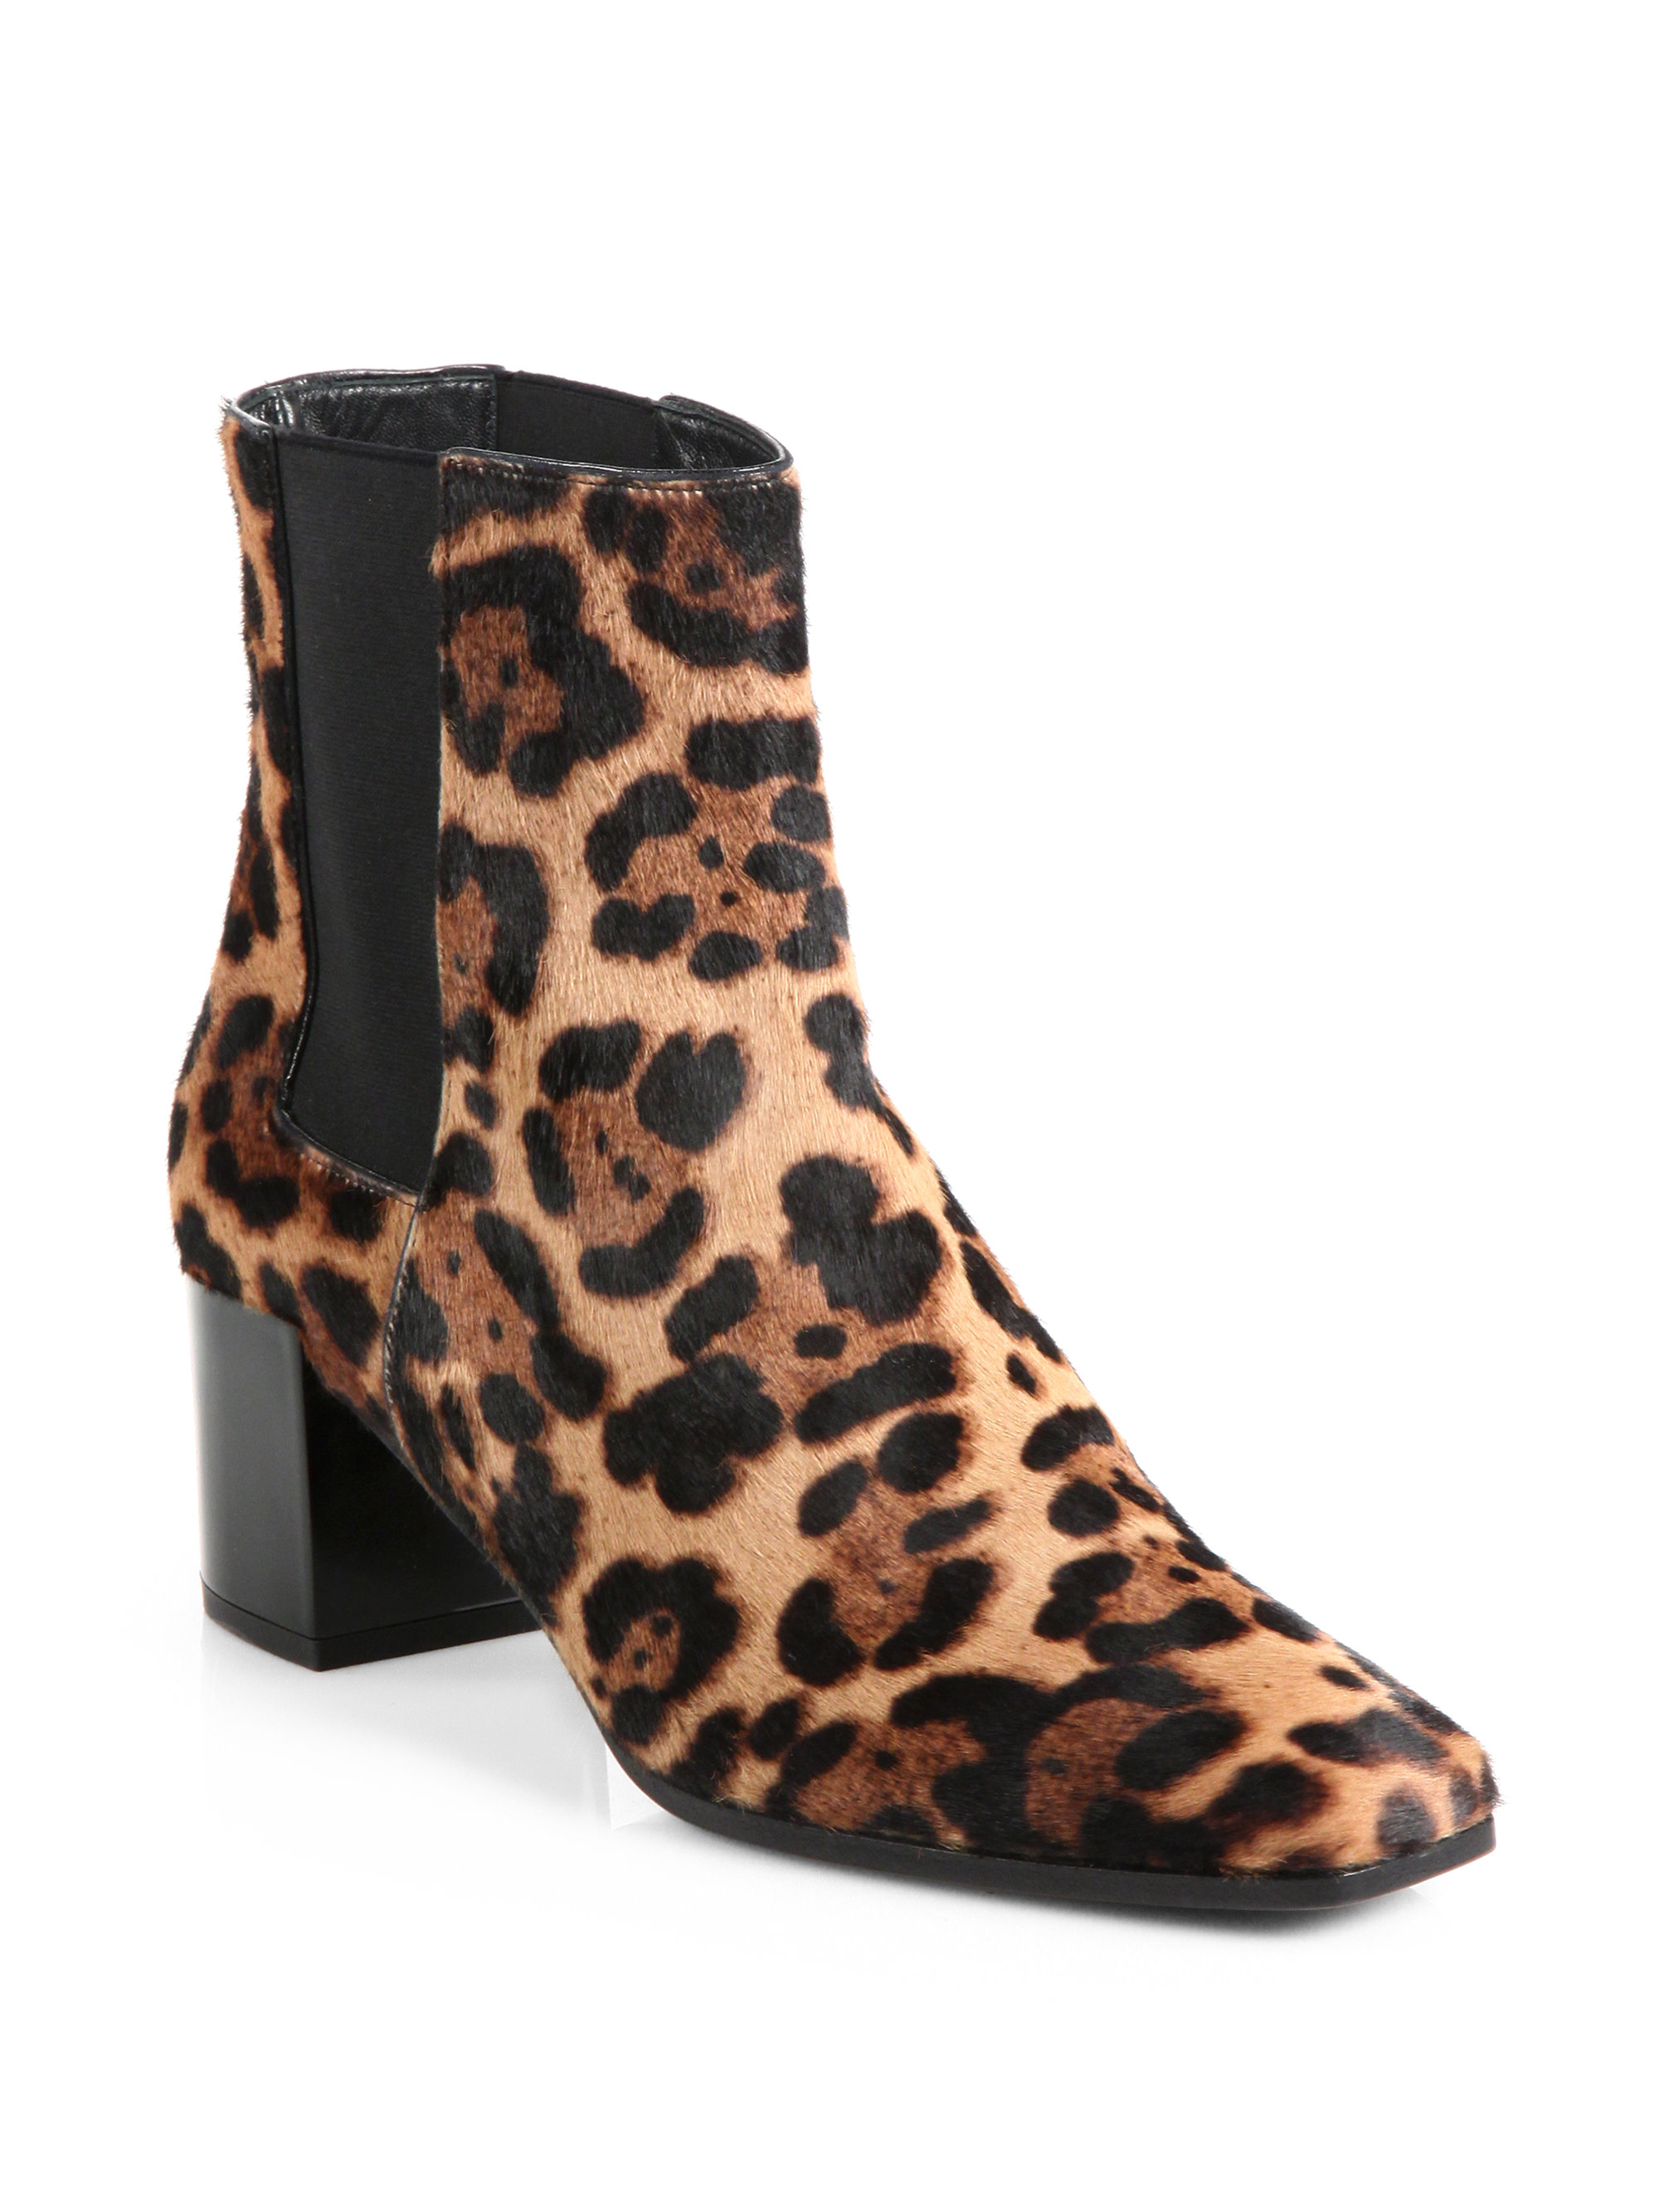 Lyst - Pierre Hardy Leopard Print Calf Hair Ankle Boots in Brown